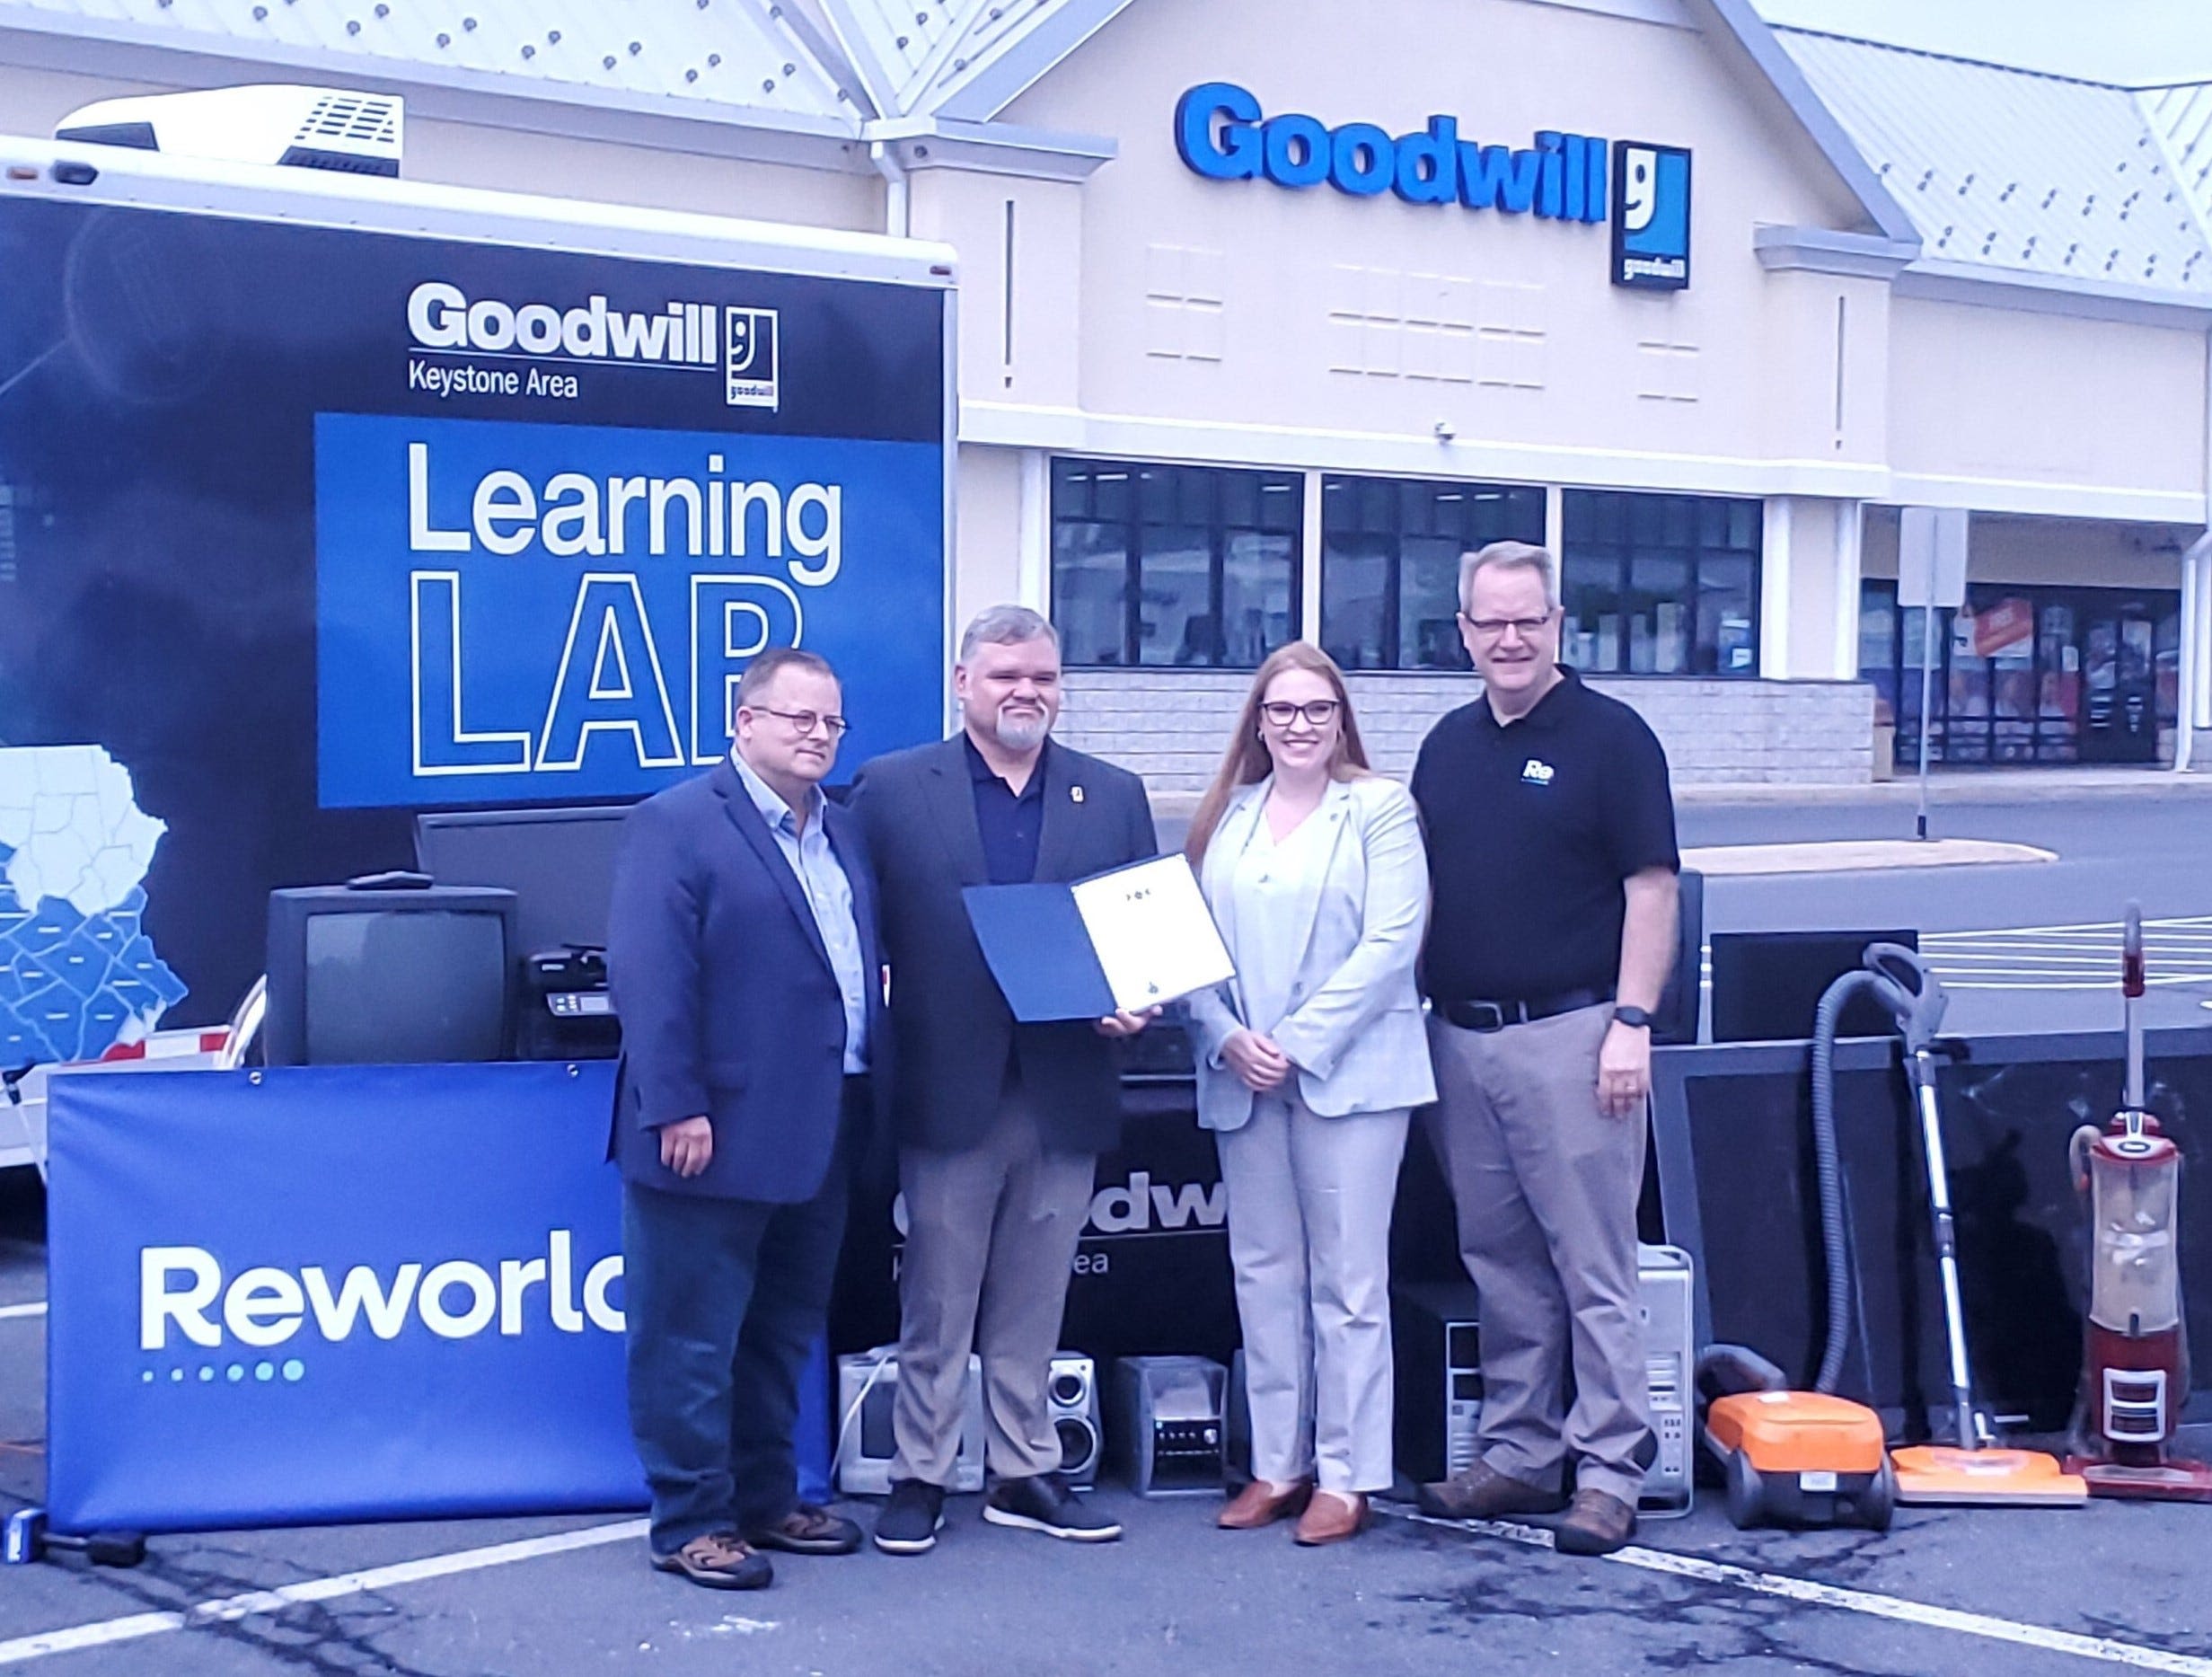 Electronic waste recycling now available at four York County Goodwill locations